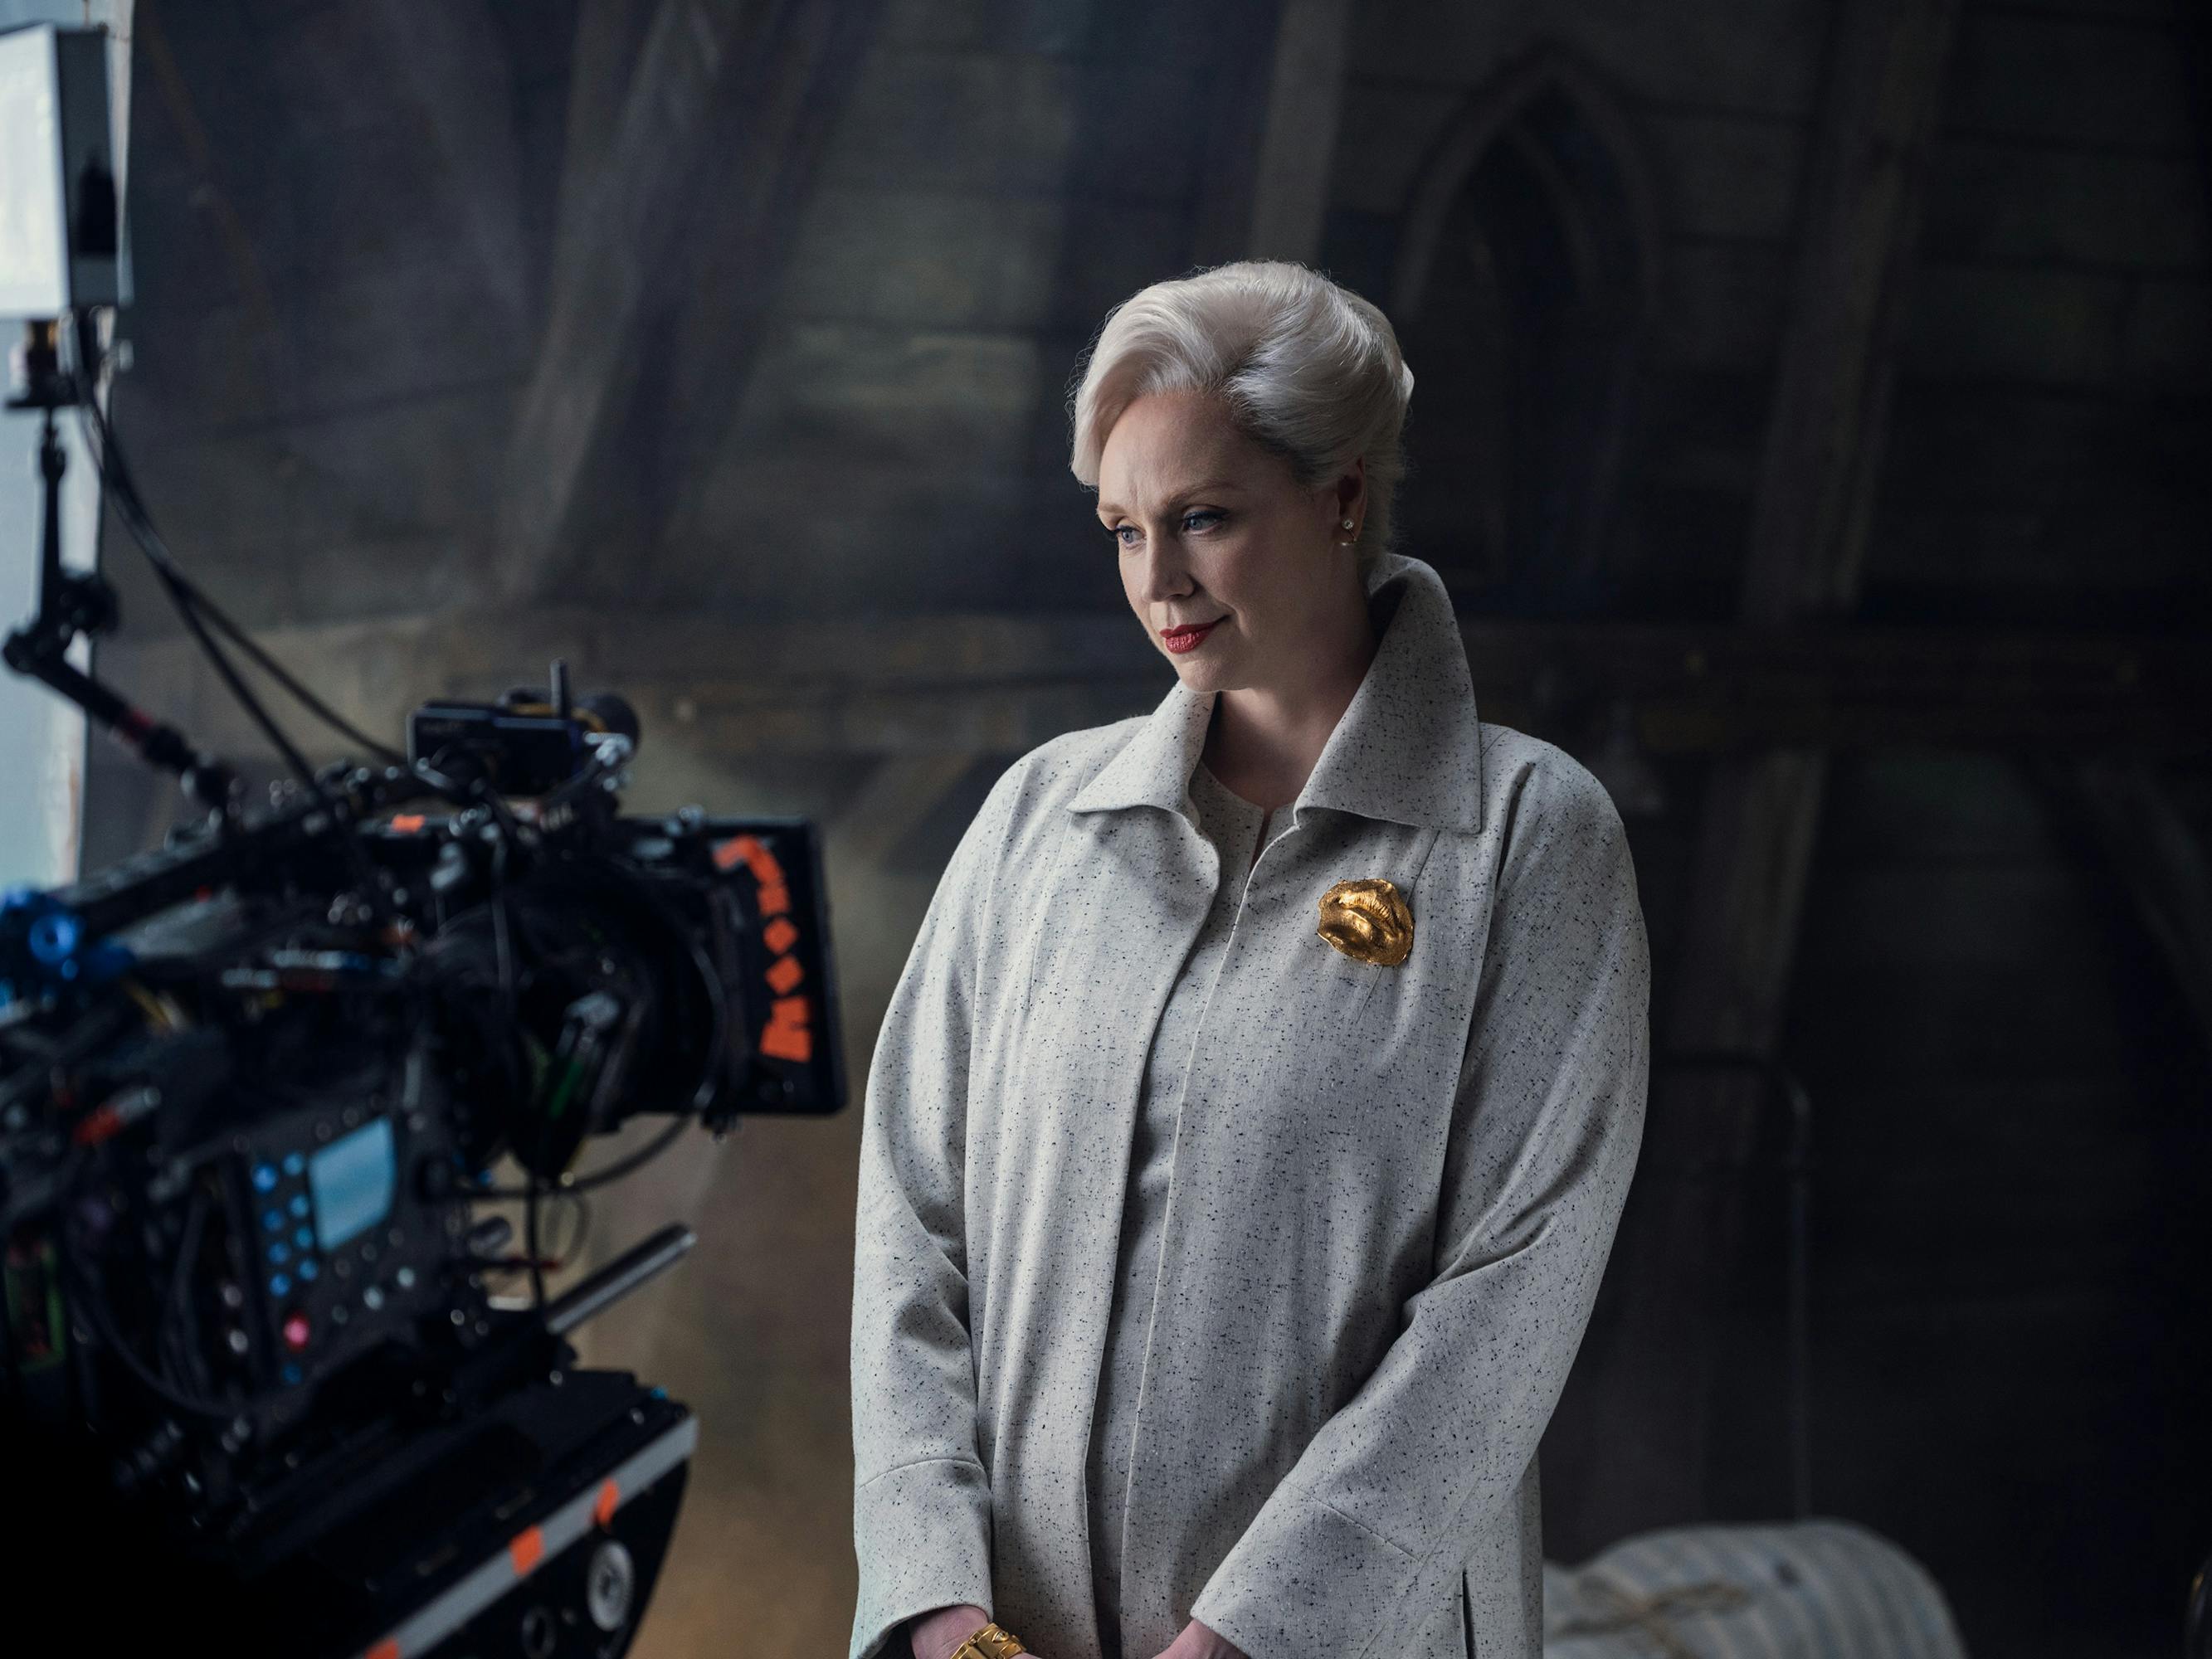 Larissa Weems (Gwendoline Christie) wears a grey coat with a gold brooch behind the scenes of Wednesday.